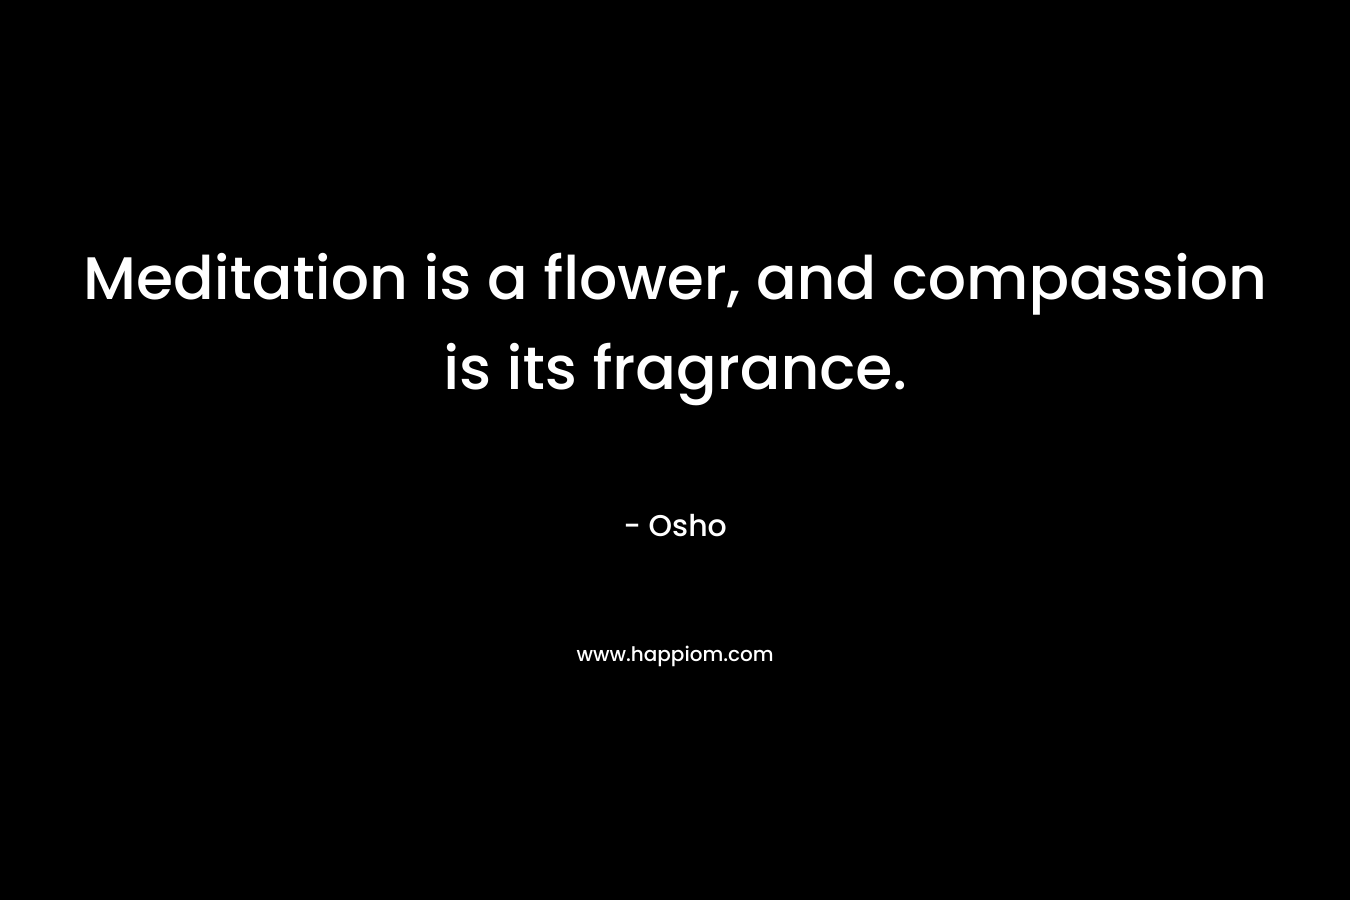 Meditation is a flower, and compassion is its fragrance.